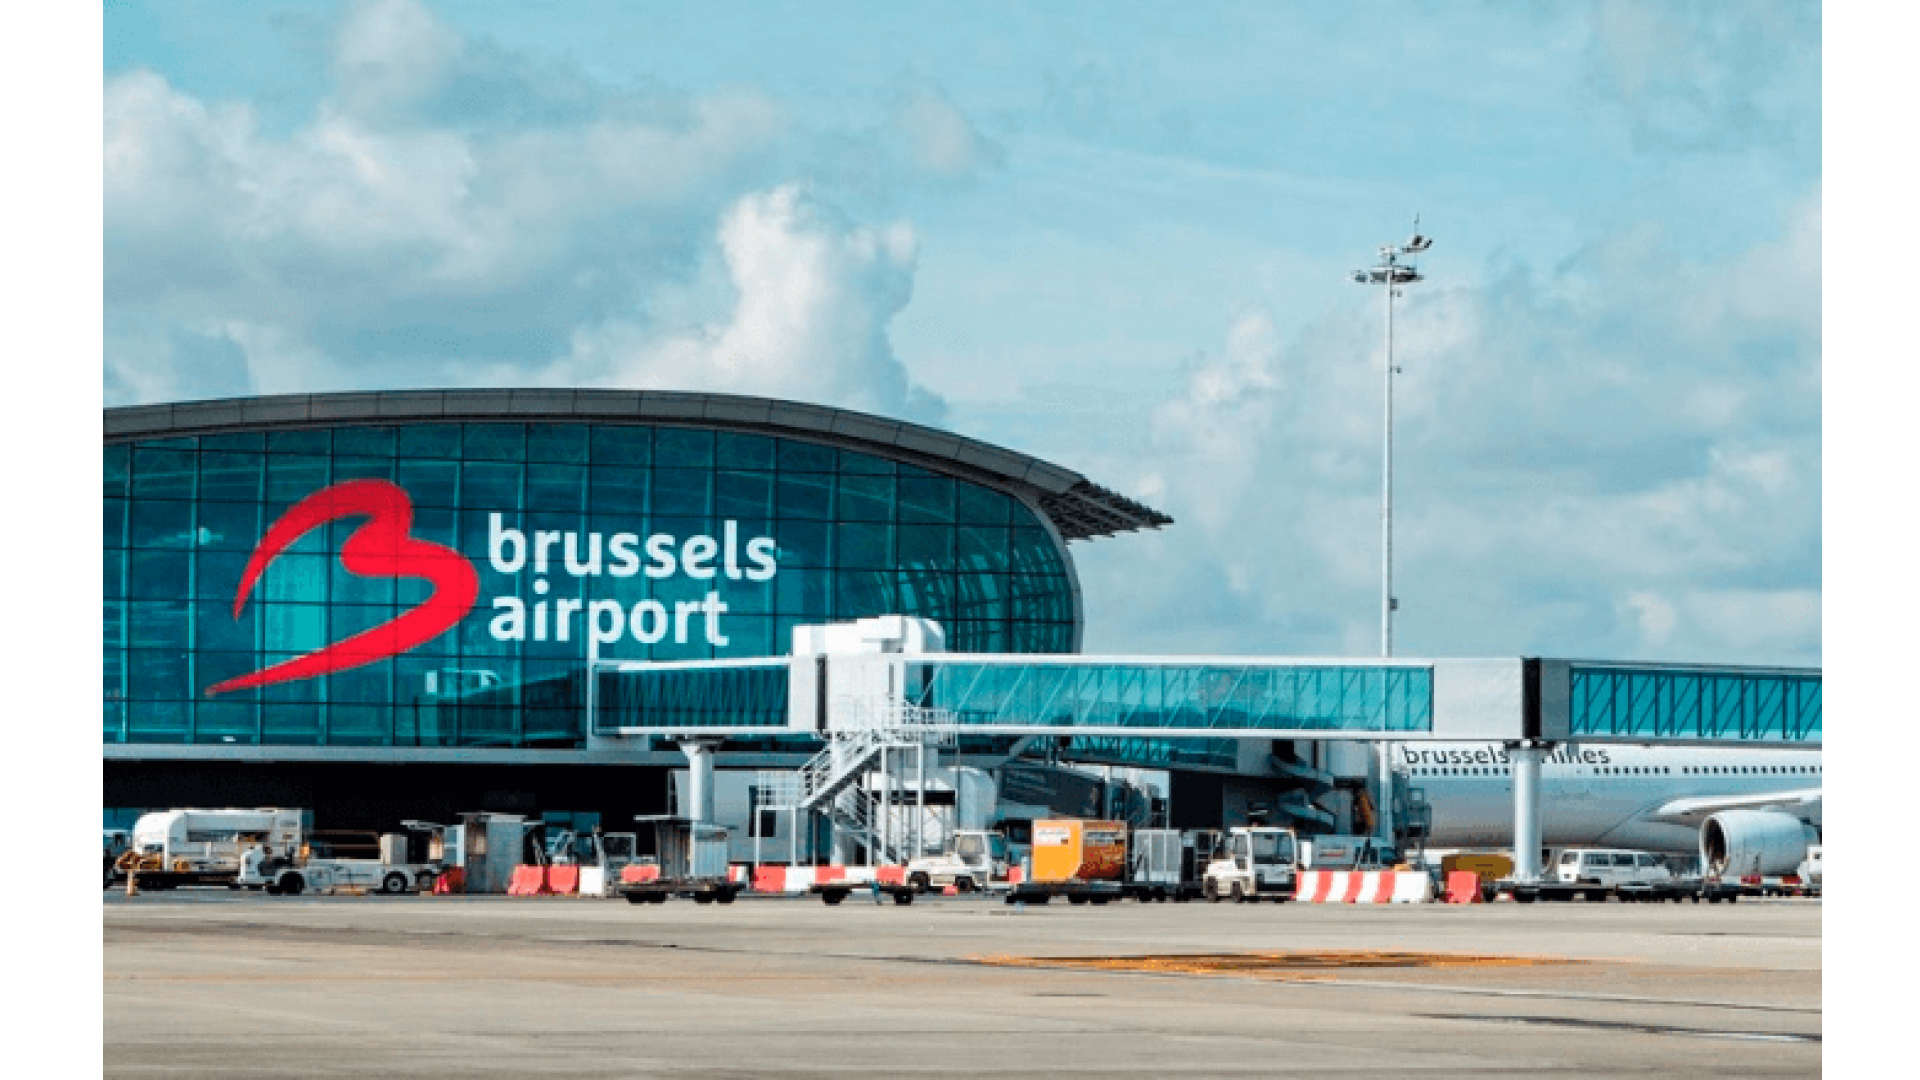 How to move between Brussels Airport and the city center